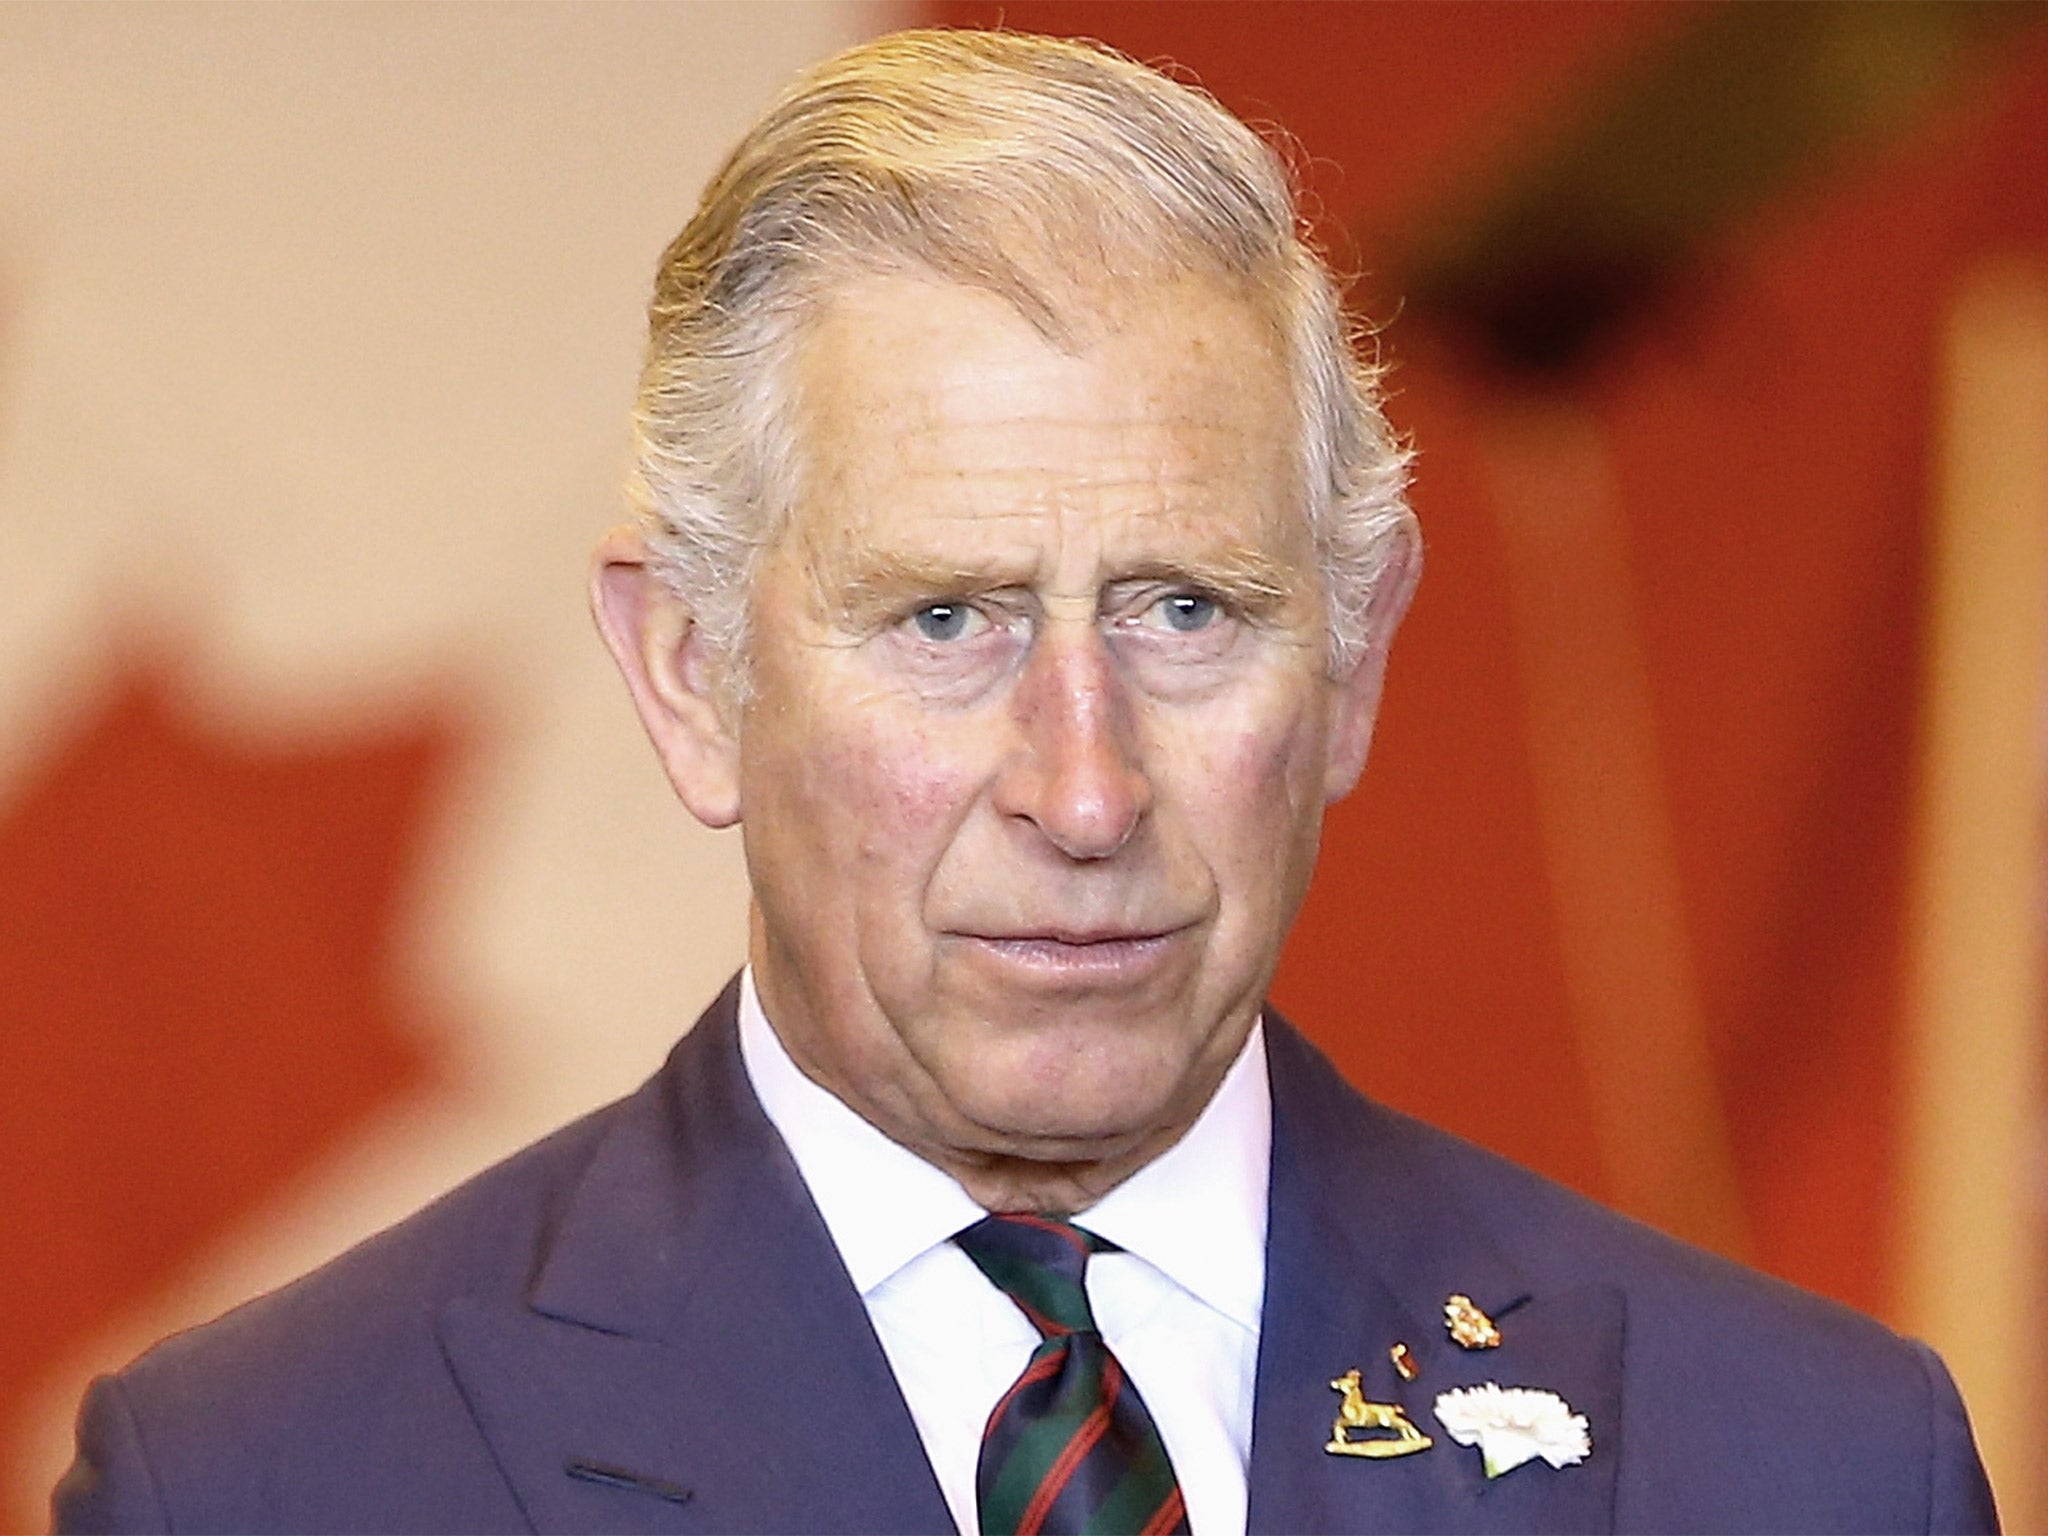 Prince Charles asked the head of the Environment Agency to "look into" a decision